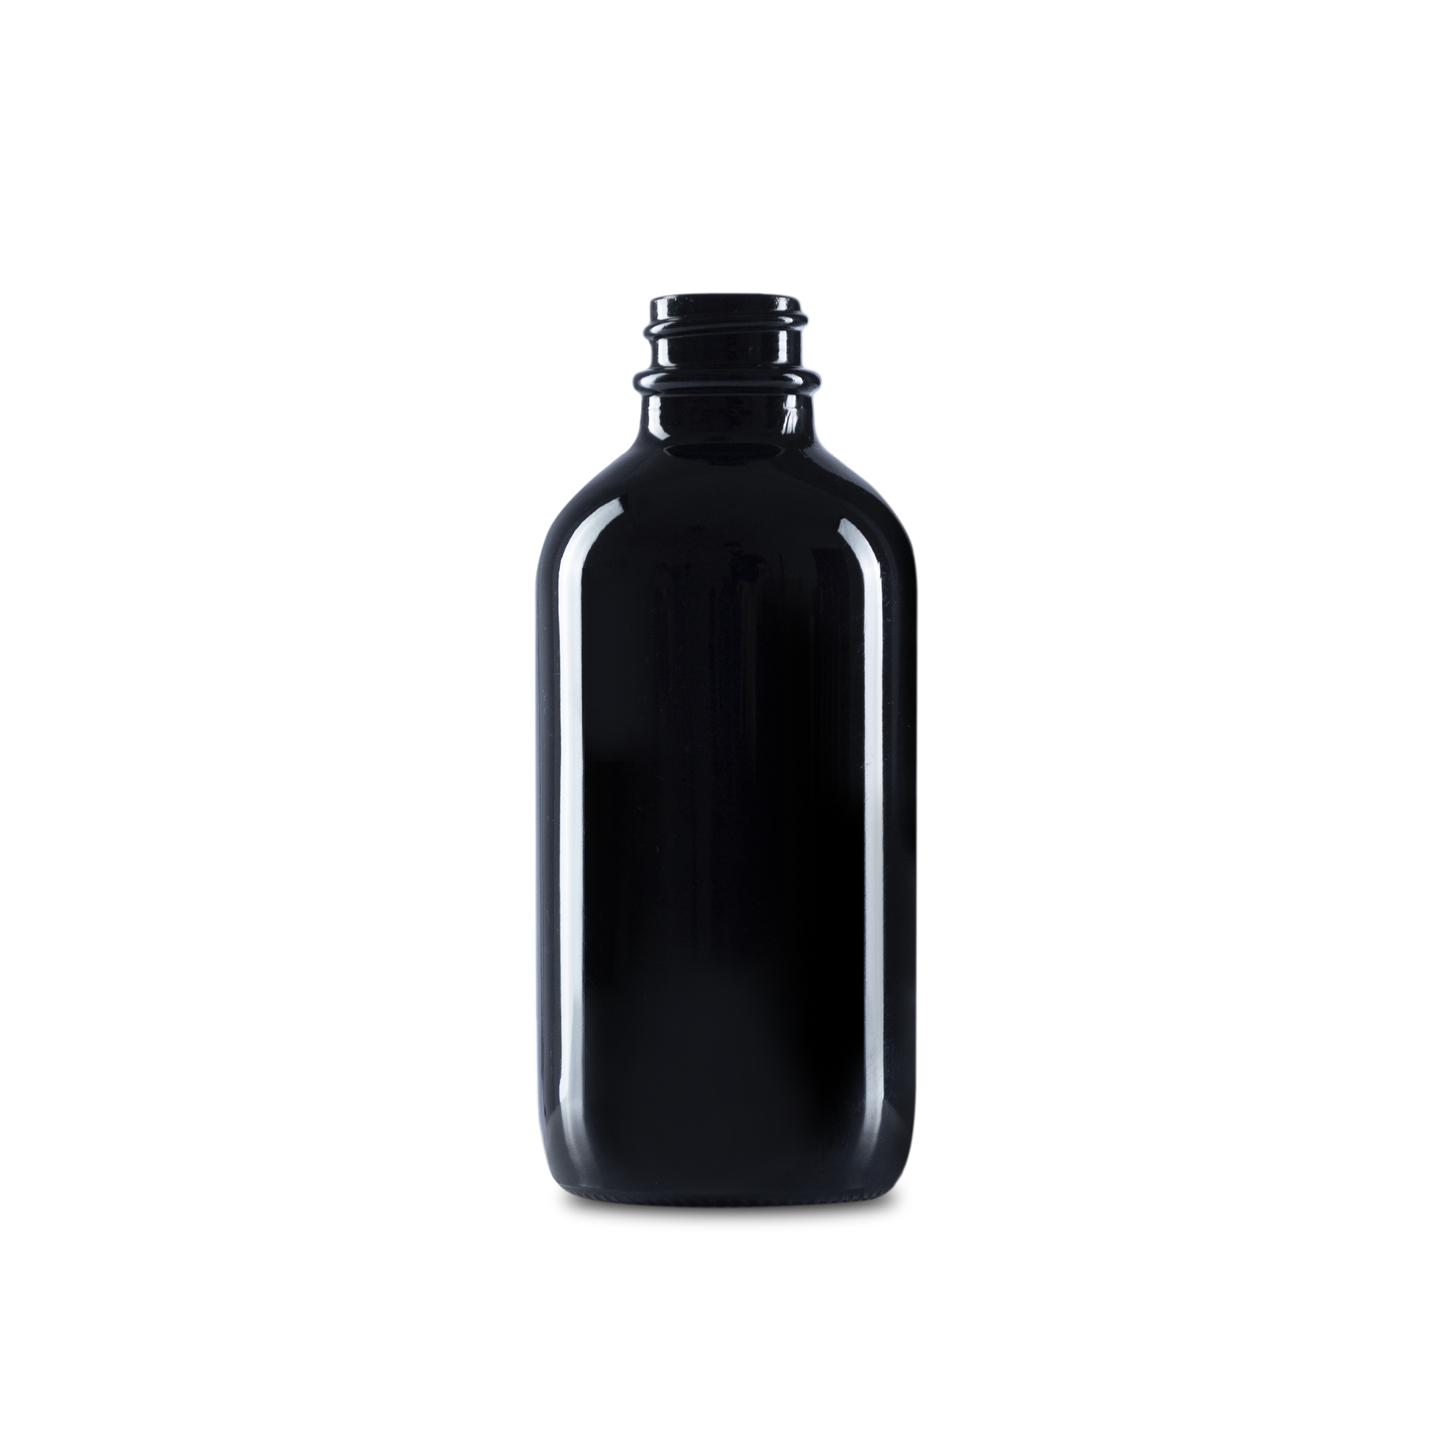 4 oz black uv boston round glass is one of the most popular glass bottles.